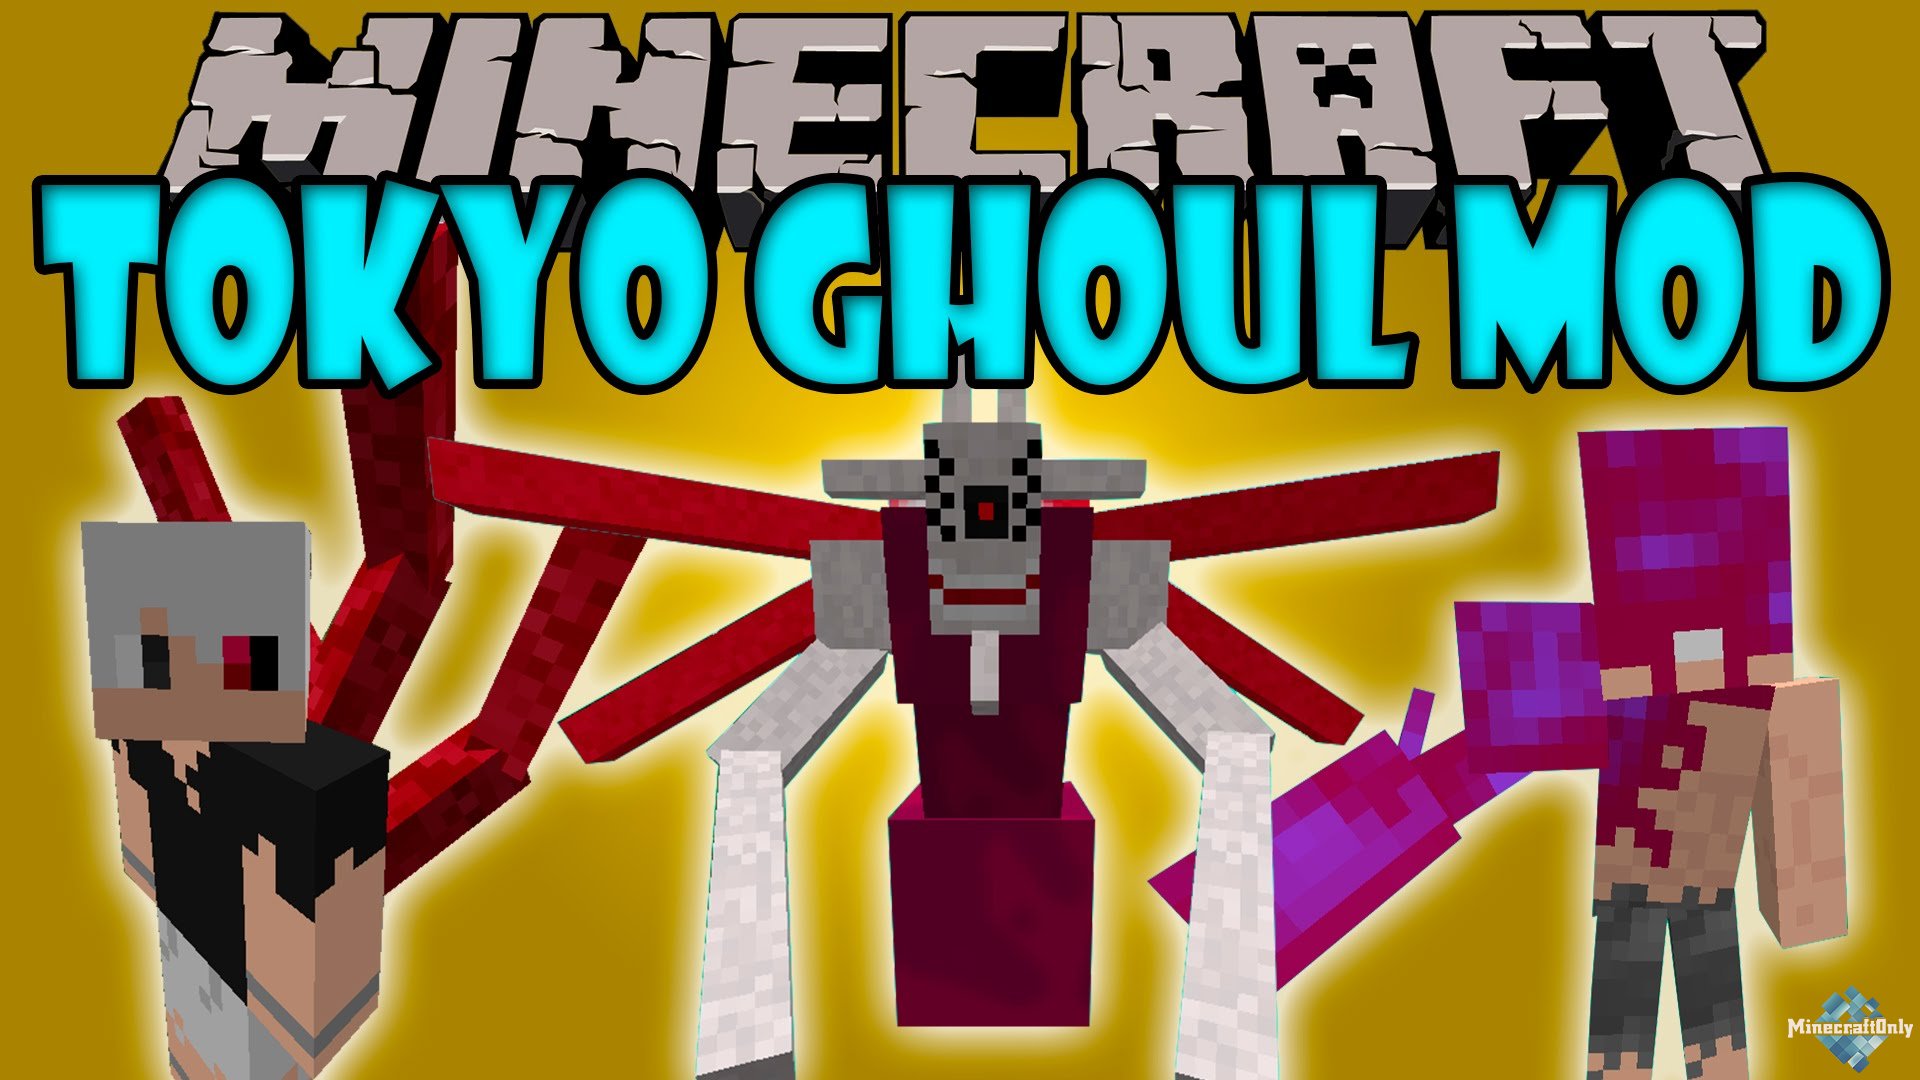 [1.7.10] Tokyo Ghoul Mod - Аниме мод!